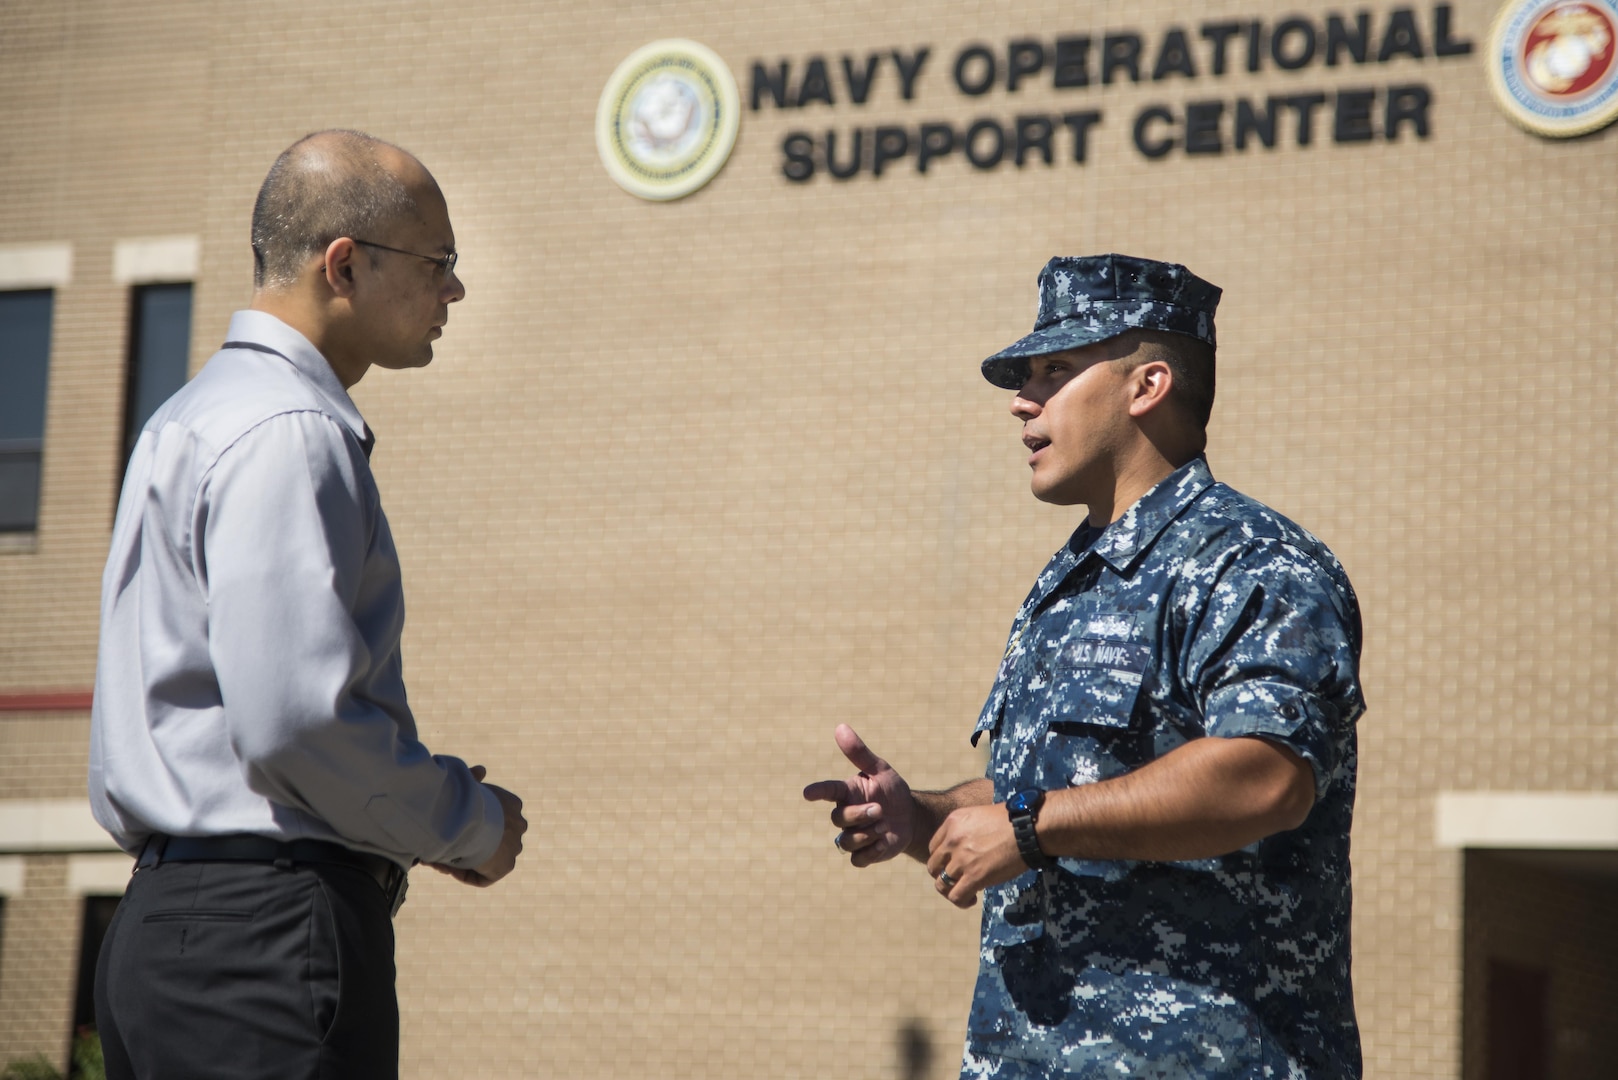 Petty Officer First Class Christopher Thomas, Navy Recruiting District San Antonio recruiter, speaks to an applicant about job opportunities in the Navy Oct. 25, 2017.  Thomas’ mission is to find officer applicants to lead naval forces in conducting operations on land, air and sea.  (U.S. Air Force photo by Sean M. Worrell)